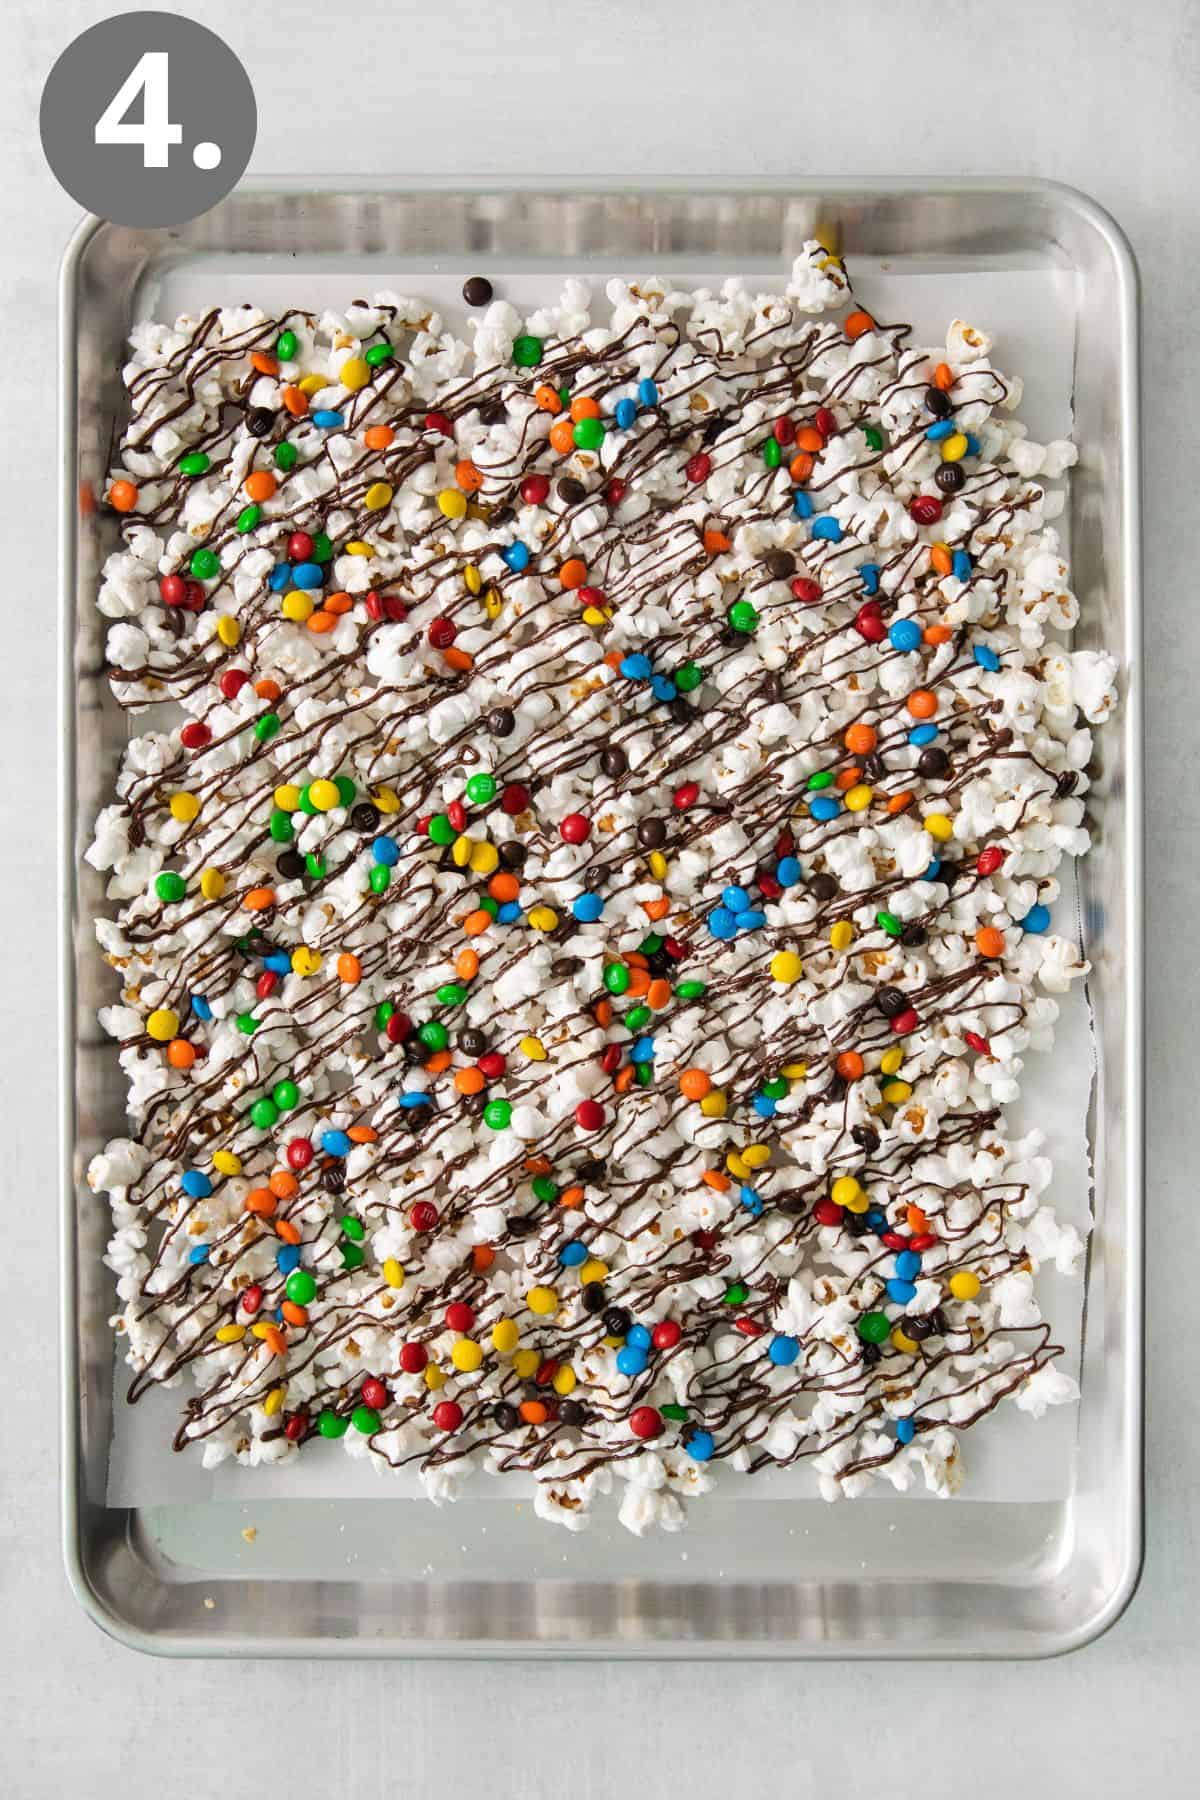 Popcorn on a baking sheet with melted chocolate and M&Ms